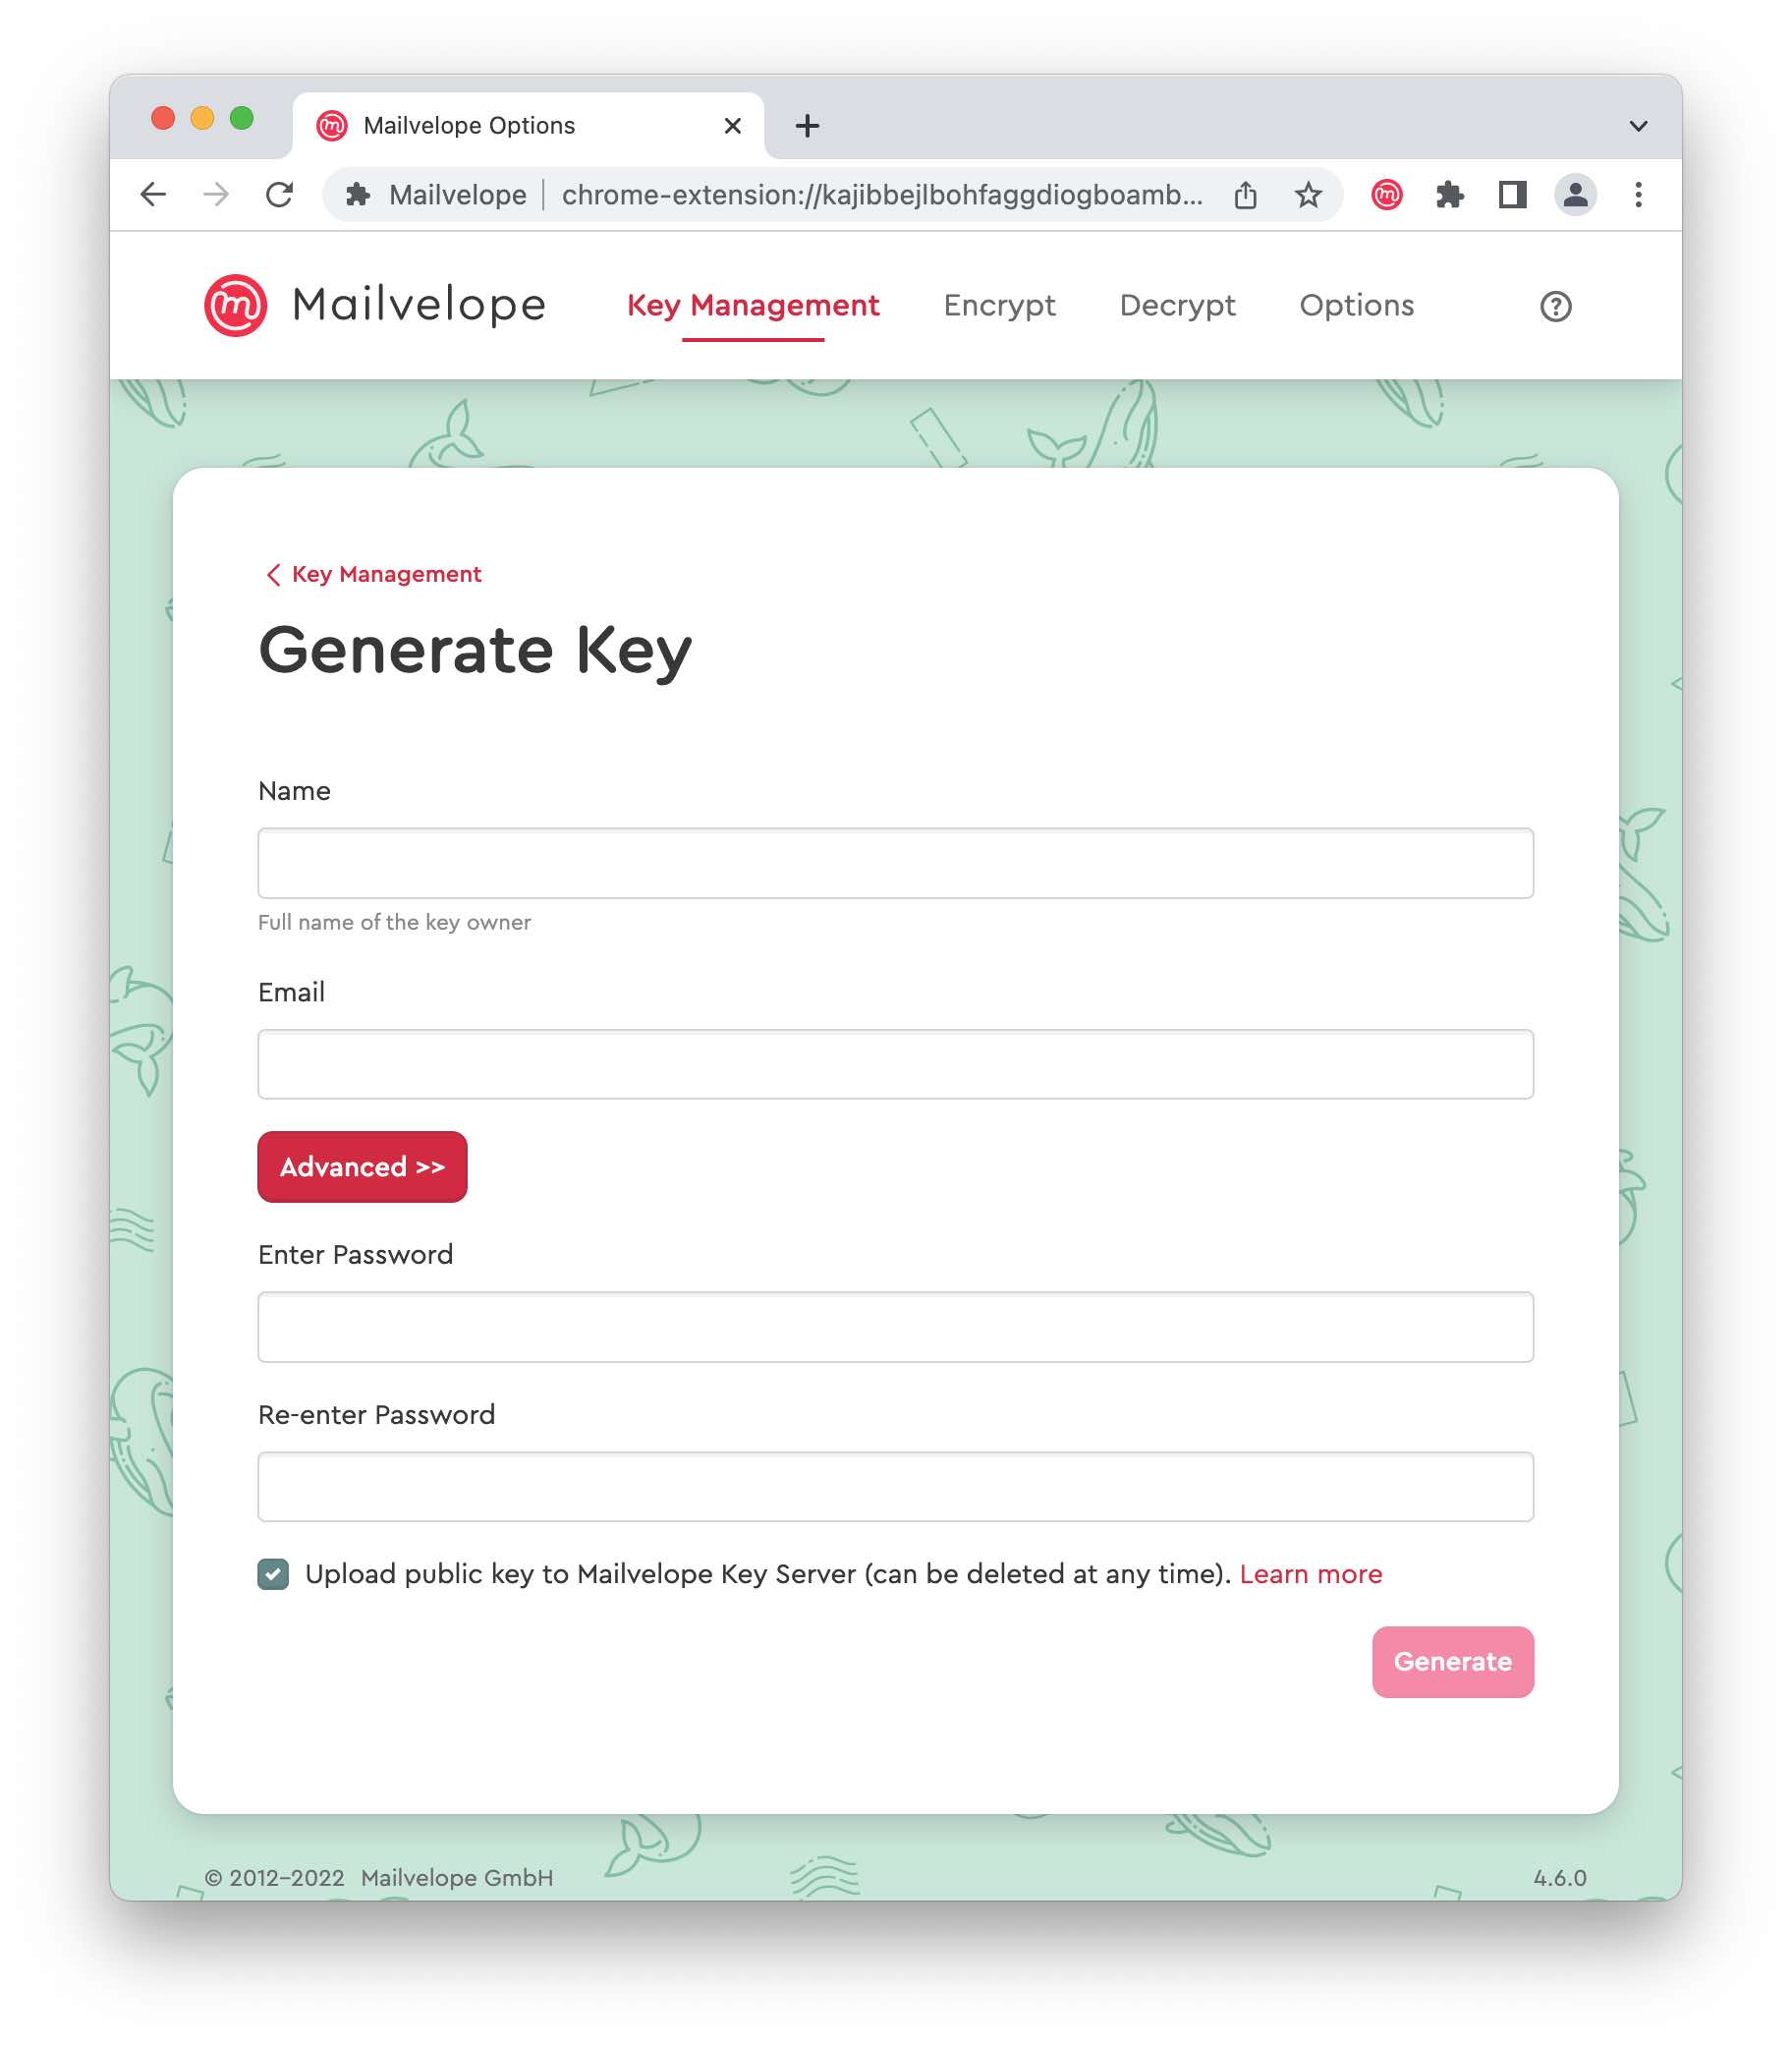 Mailvelope Input Screen for generating a new key